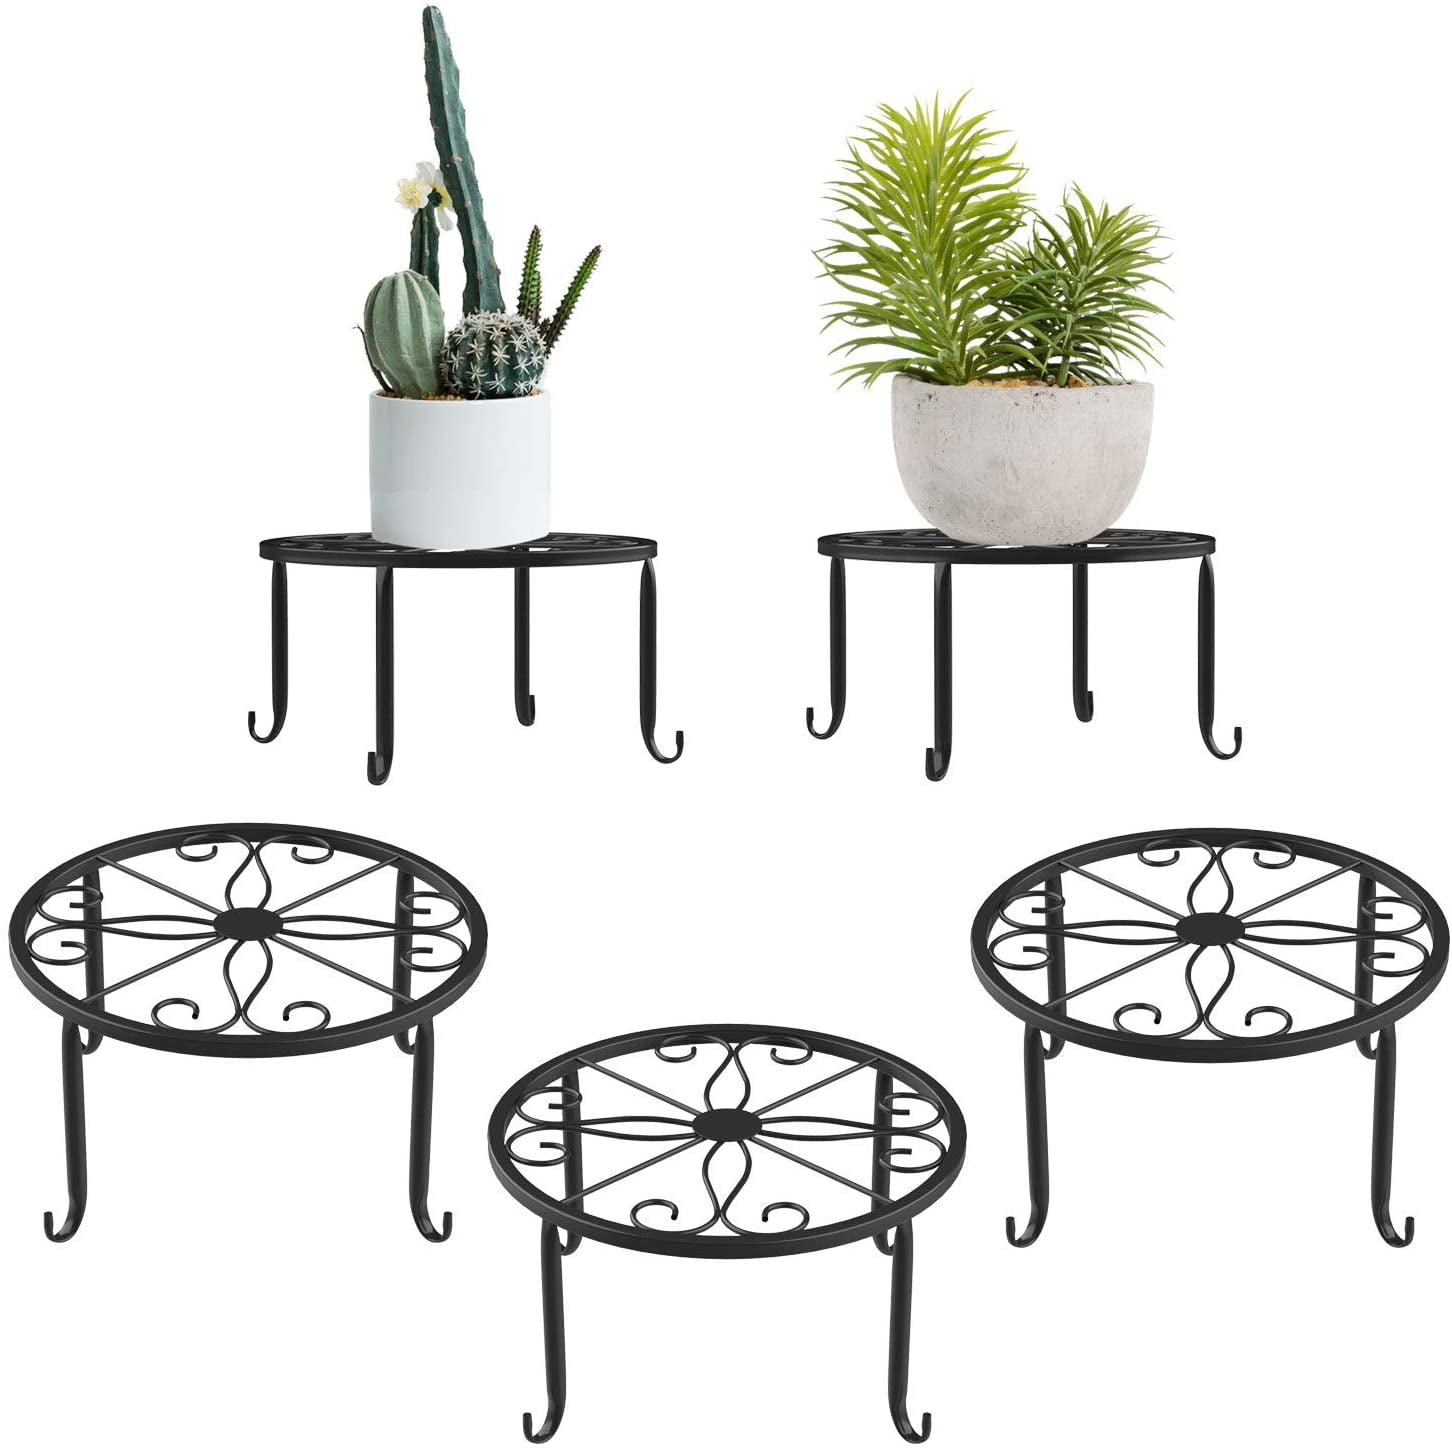 9 x 4.6 Inches, Black-1 3 Pack Black Plant Stand for Flower Pot Heavy Duty Potted Holder Indoor Outdoor Metal Rustproof Iron Garden Container Round Supports Rack for Planter Bronze